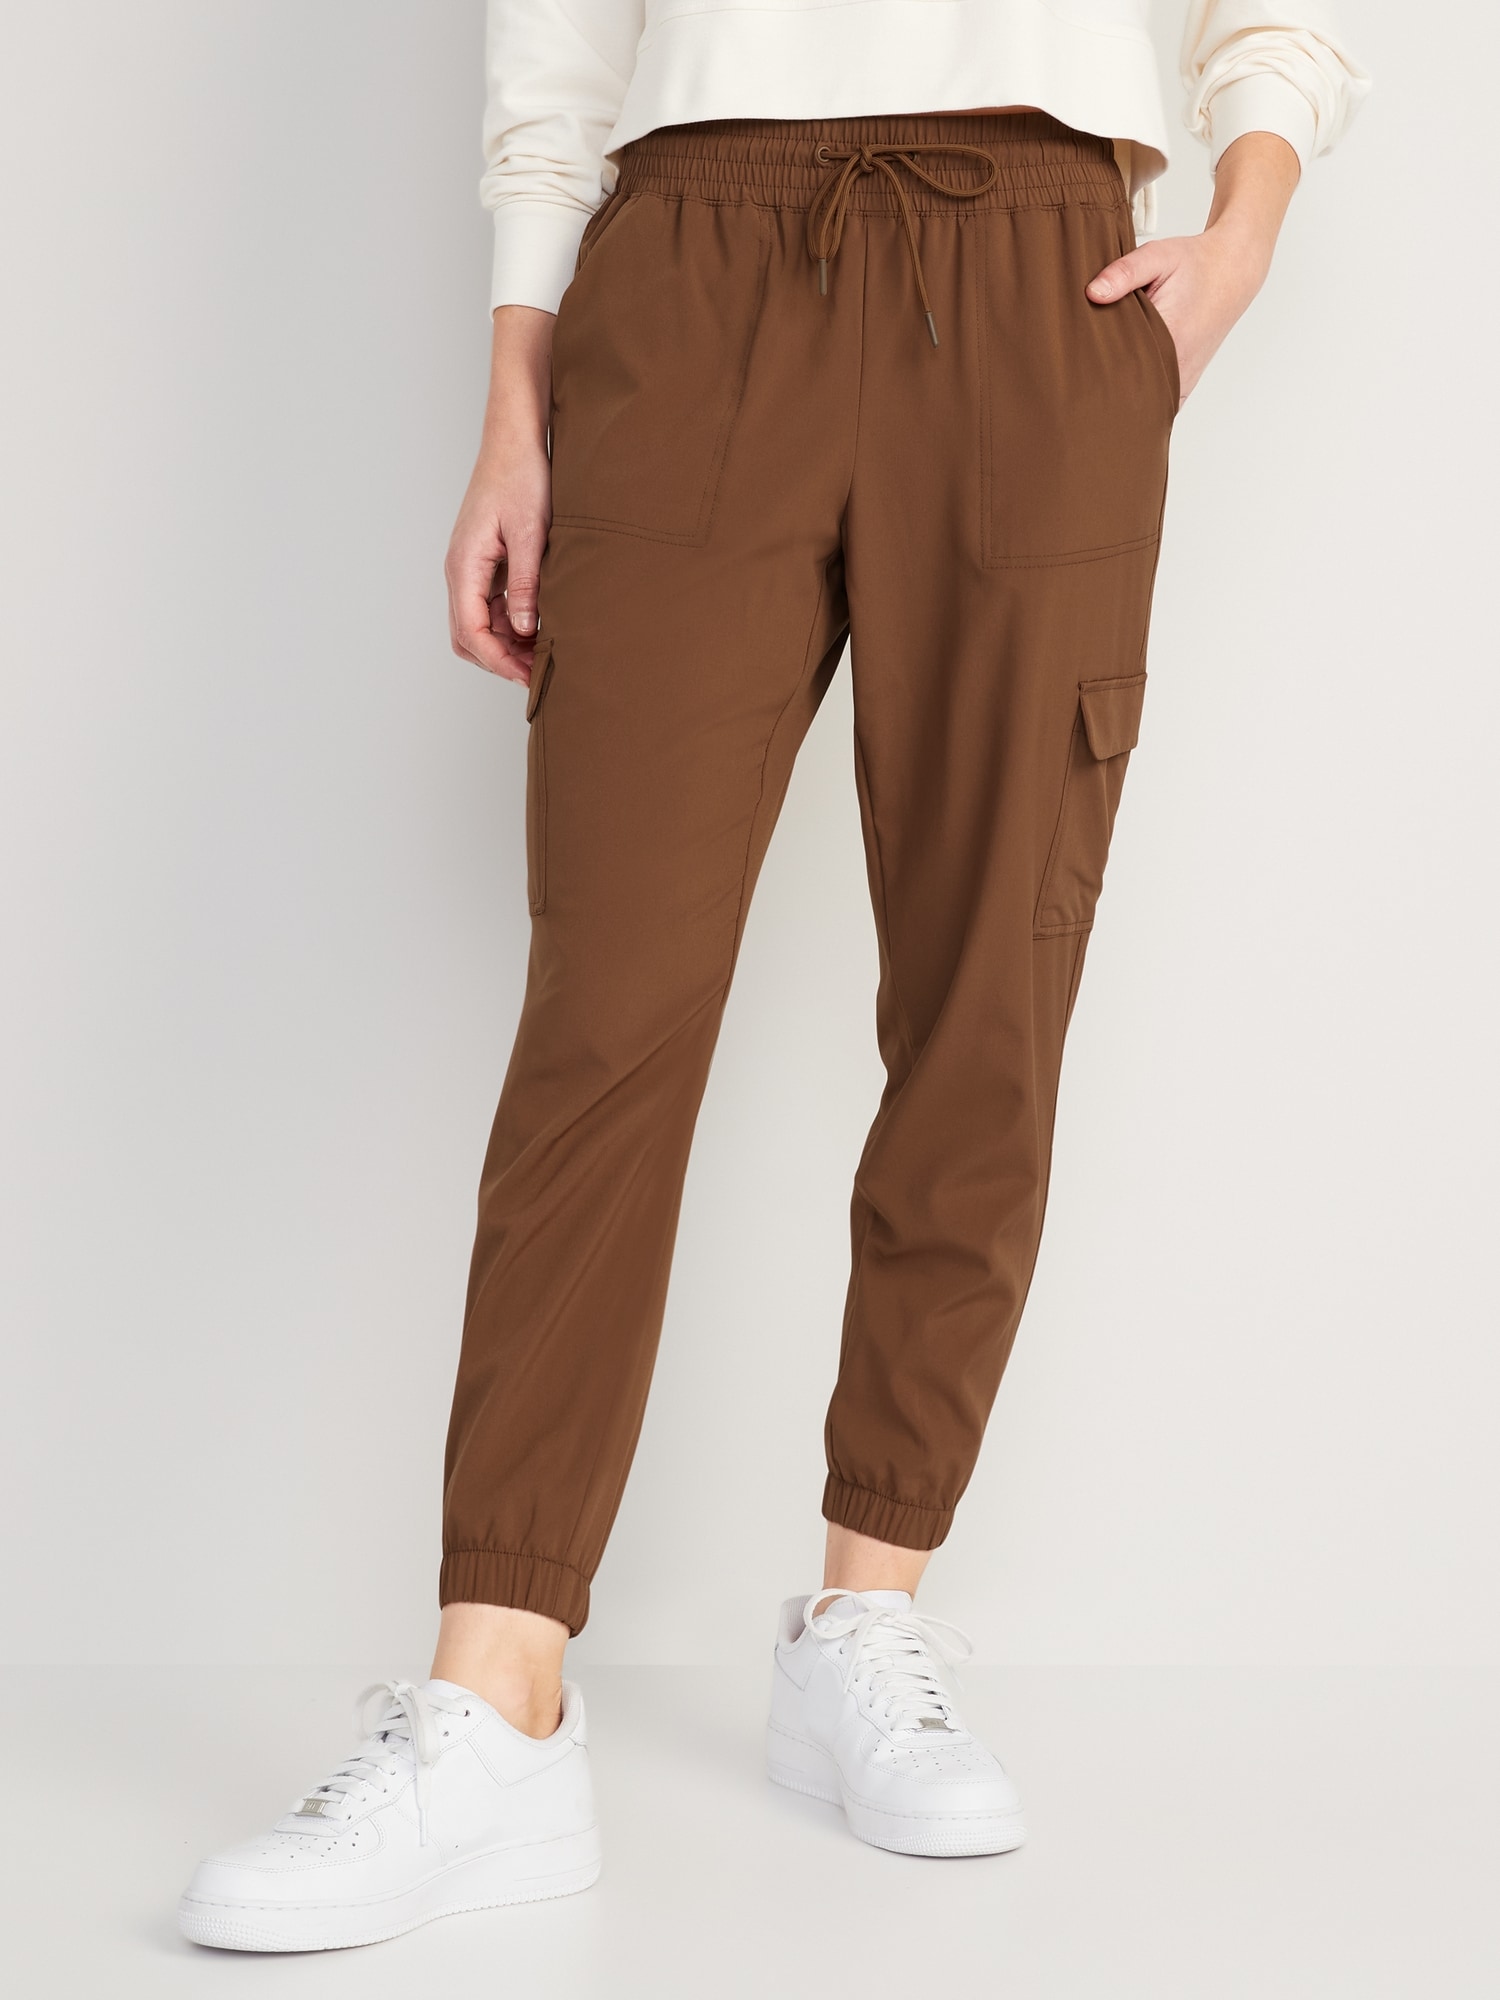 High-Waisted StretchTech Cargo Jogger Pants for Women, Old Navy